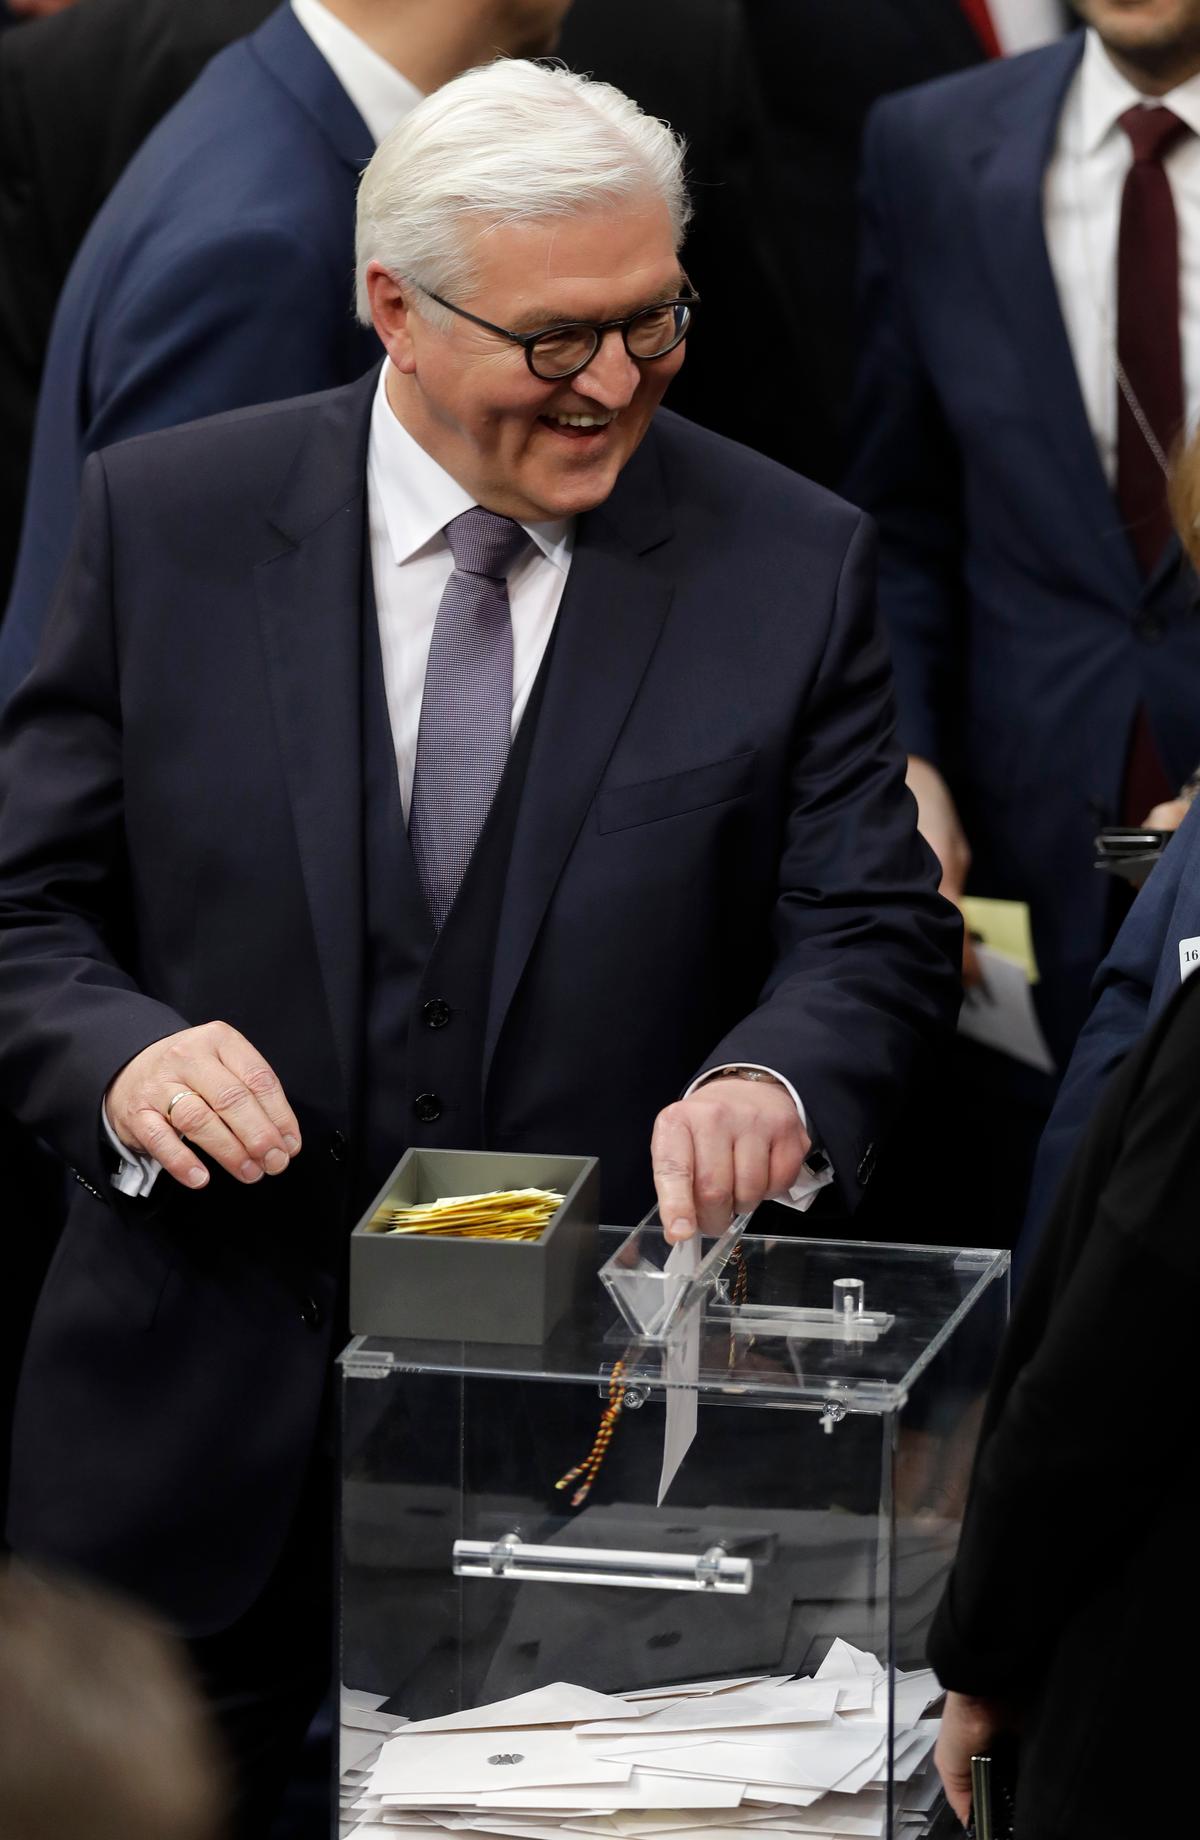 German presidential candidate Frank-Walter Steinmeier casts his ballot when a German parliamentary assembly came together to elect the country's new president in Berlin Germany on Feb. 12, 2017. (AP Photo/Michael Sohn)